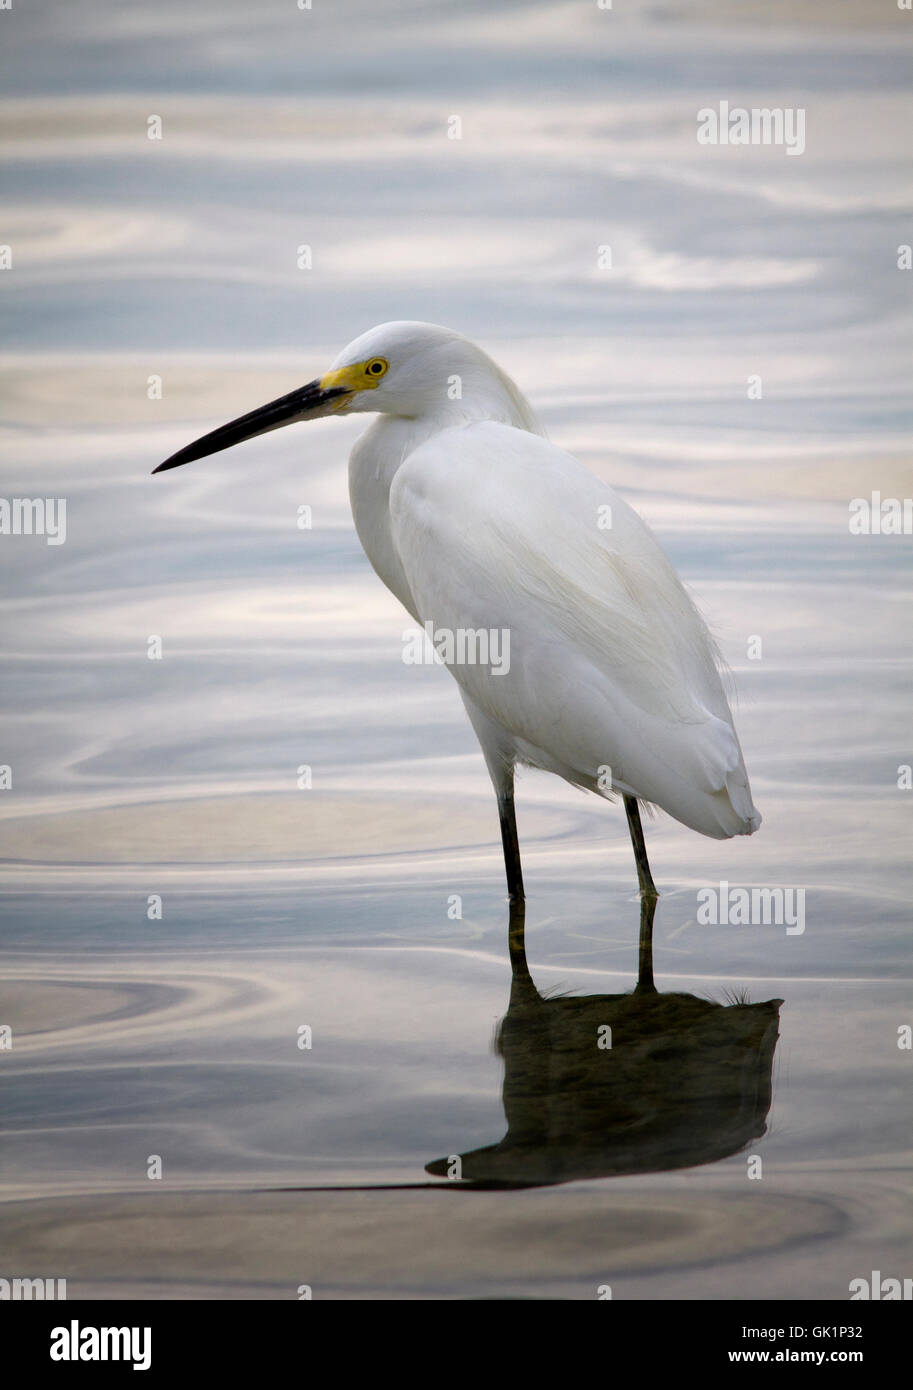 A Snowy Egret wades in the shallow waters of Florida Bay, Key Largo. The descending sun turns the shallow water to satin. Stock Photo